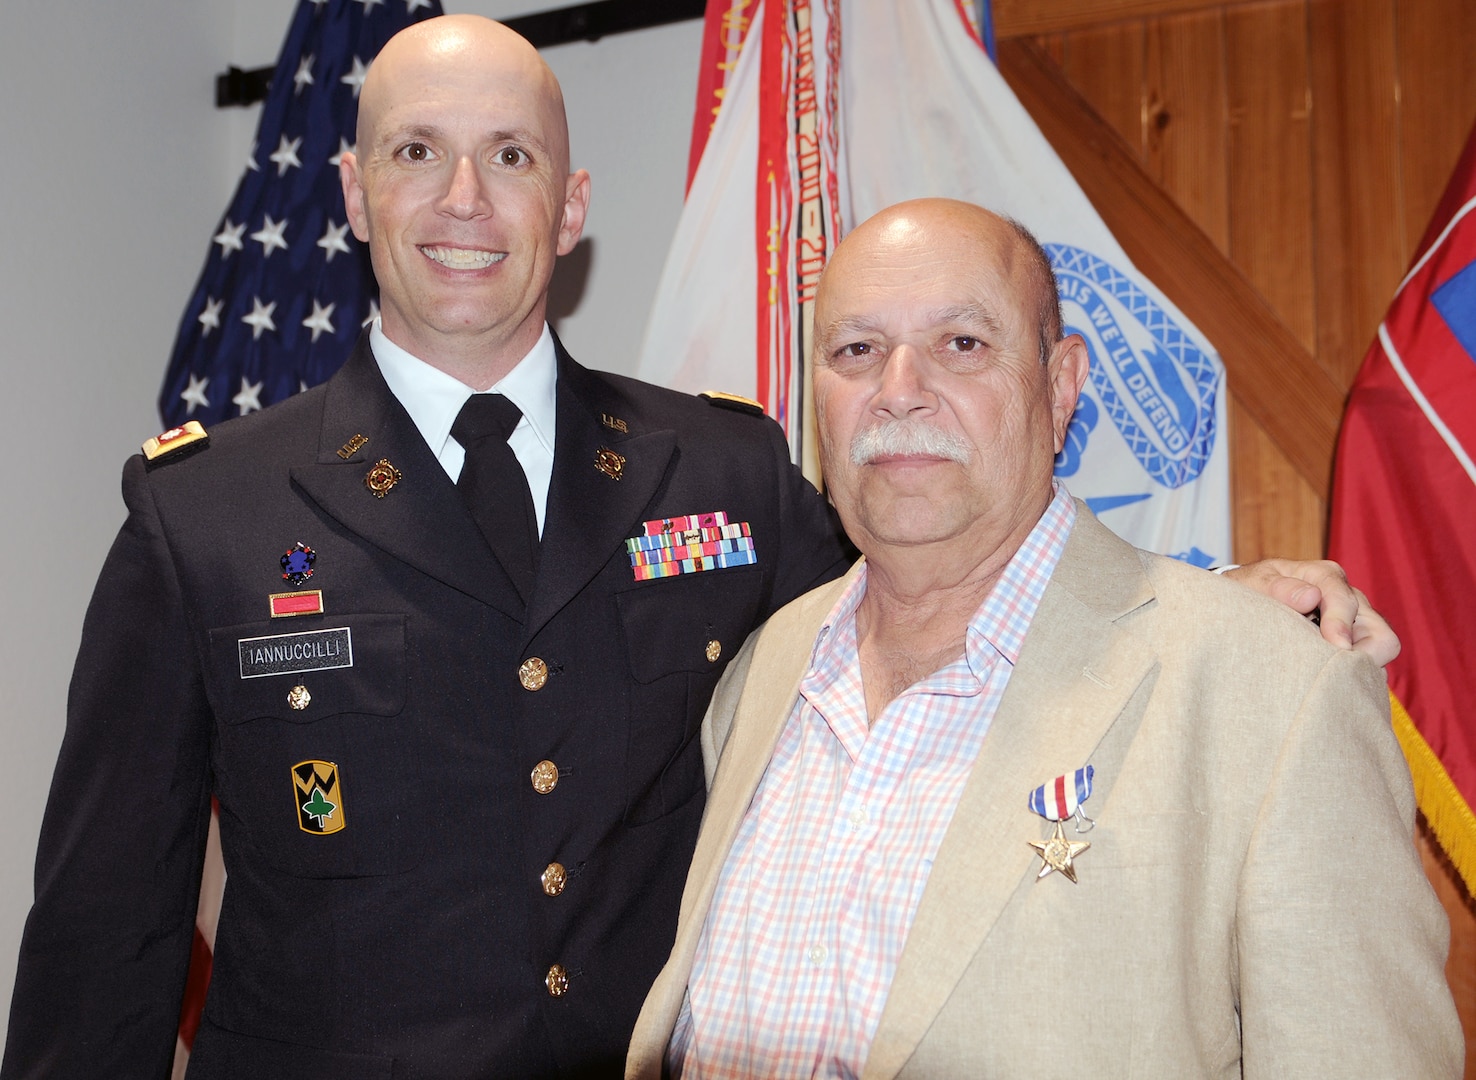 Newly promoted Lt. Col. Michael Iannuccilli (left), U.S. Army North (Fifth Army) stands with his father, Edward, following their ceremonies July 7 at Joint Base San Antonio-Fort Sam Houston. The elder Iannuccilli, received his Silver Star in a surprise ceremony following Lt. Col. Iannuccilli’s promotion. Edward’s heroism occurred April 7, 1970, in Vietnam, when as a combat medic he disregarded his own safety to rescue a pilot trapped inside a burning medical evacuation helicopter, while the enemy fired on him and ammunition inside the aircraft exploded. 